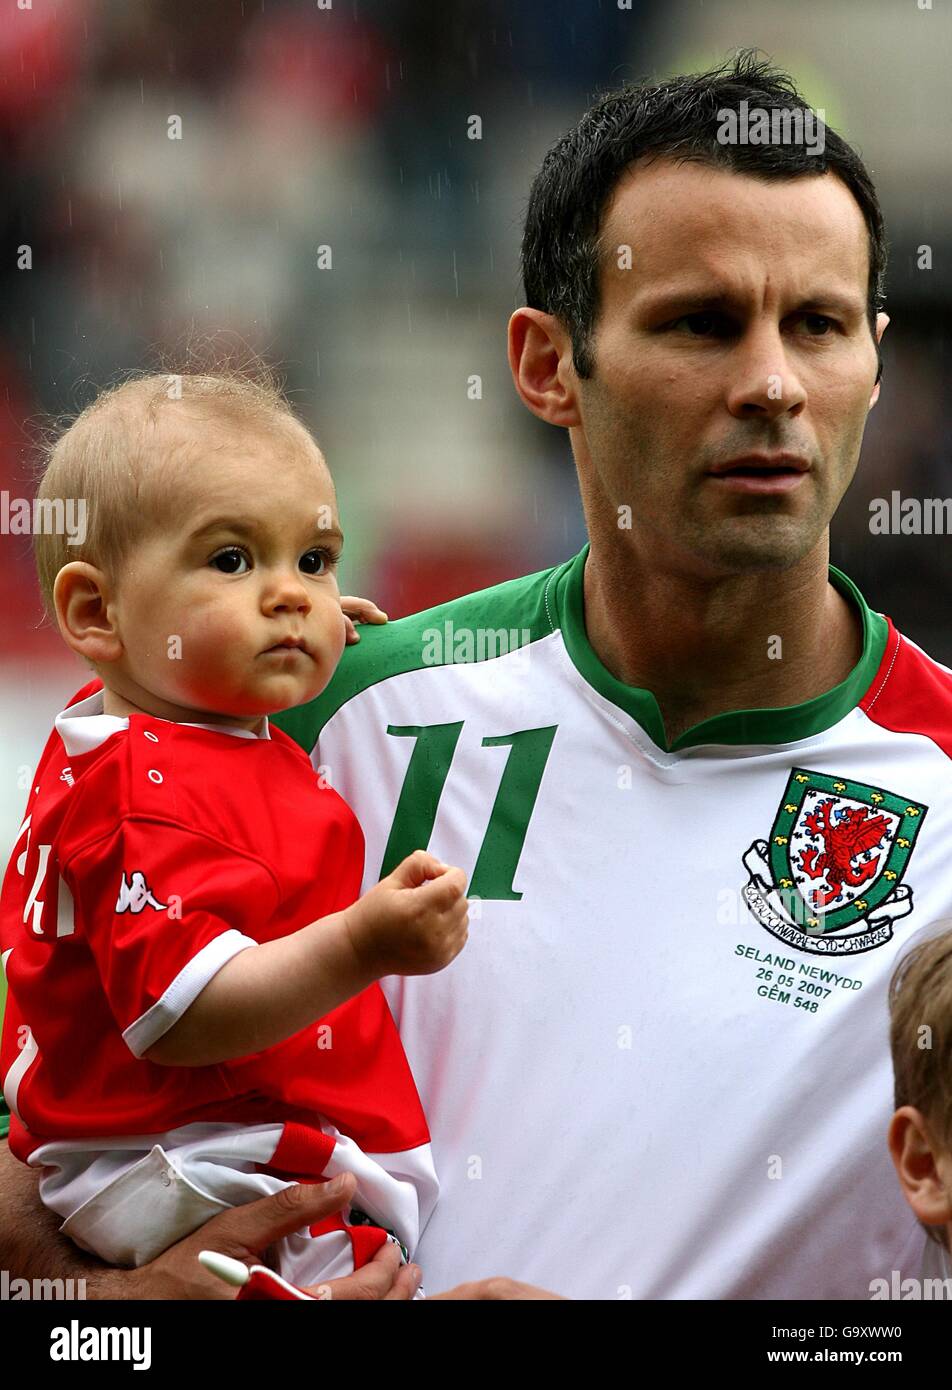 Soccer - International Friendly - Wales v New Zealand - Racecourse Ground. Wales' Ryan Giggs with mascot prior to kick off Stock Photo